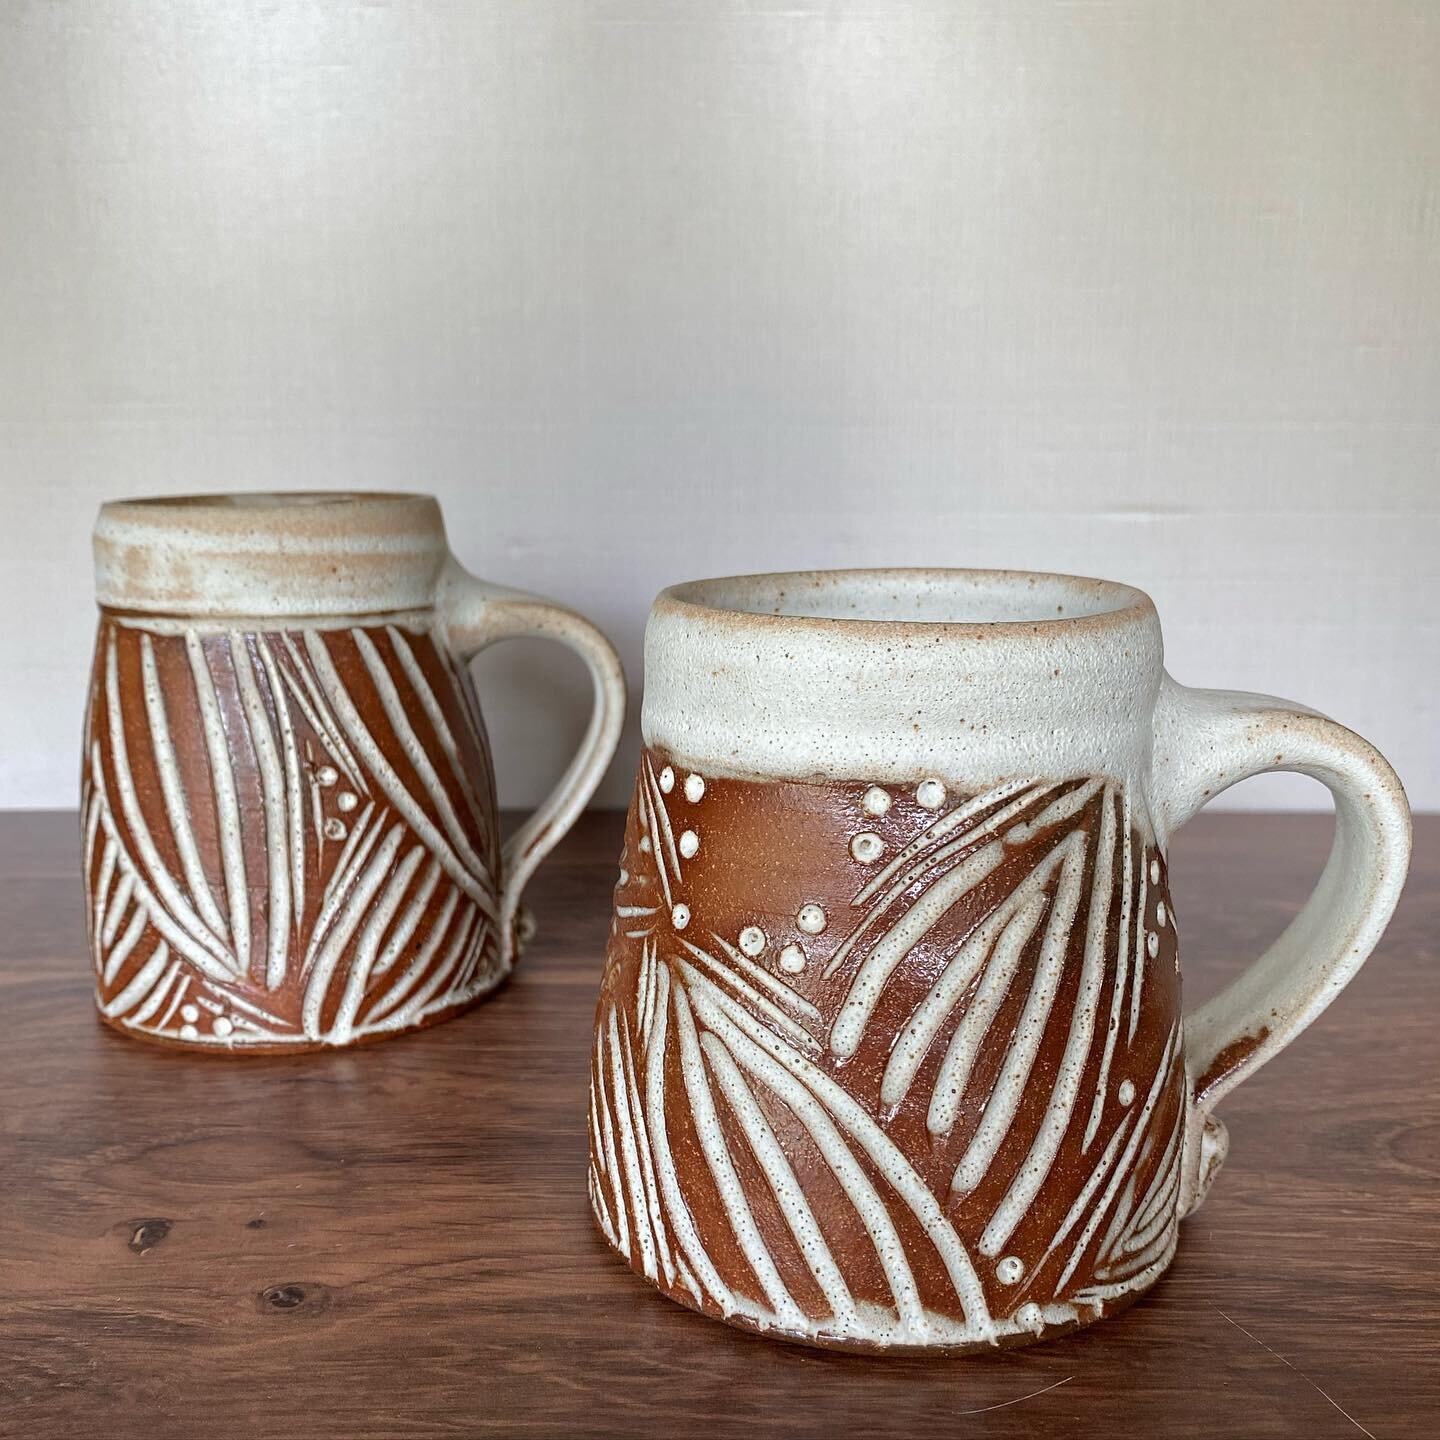 I got some nice toasty leaf mugs out of this last firing.  Loading up the kiln again tomorrow night then off to the Pour Farm for the Maine Makers Summer Pop Up on Sunday from 1-5.  I hope to see you there ❤️